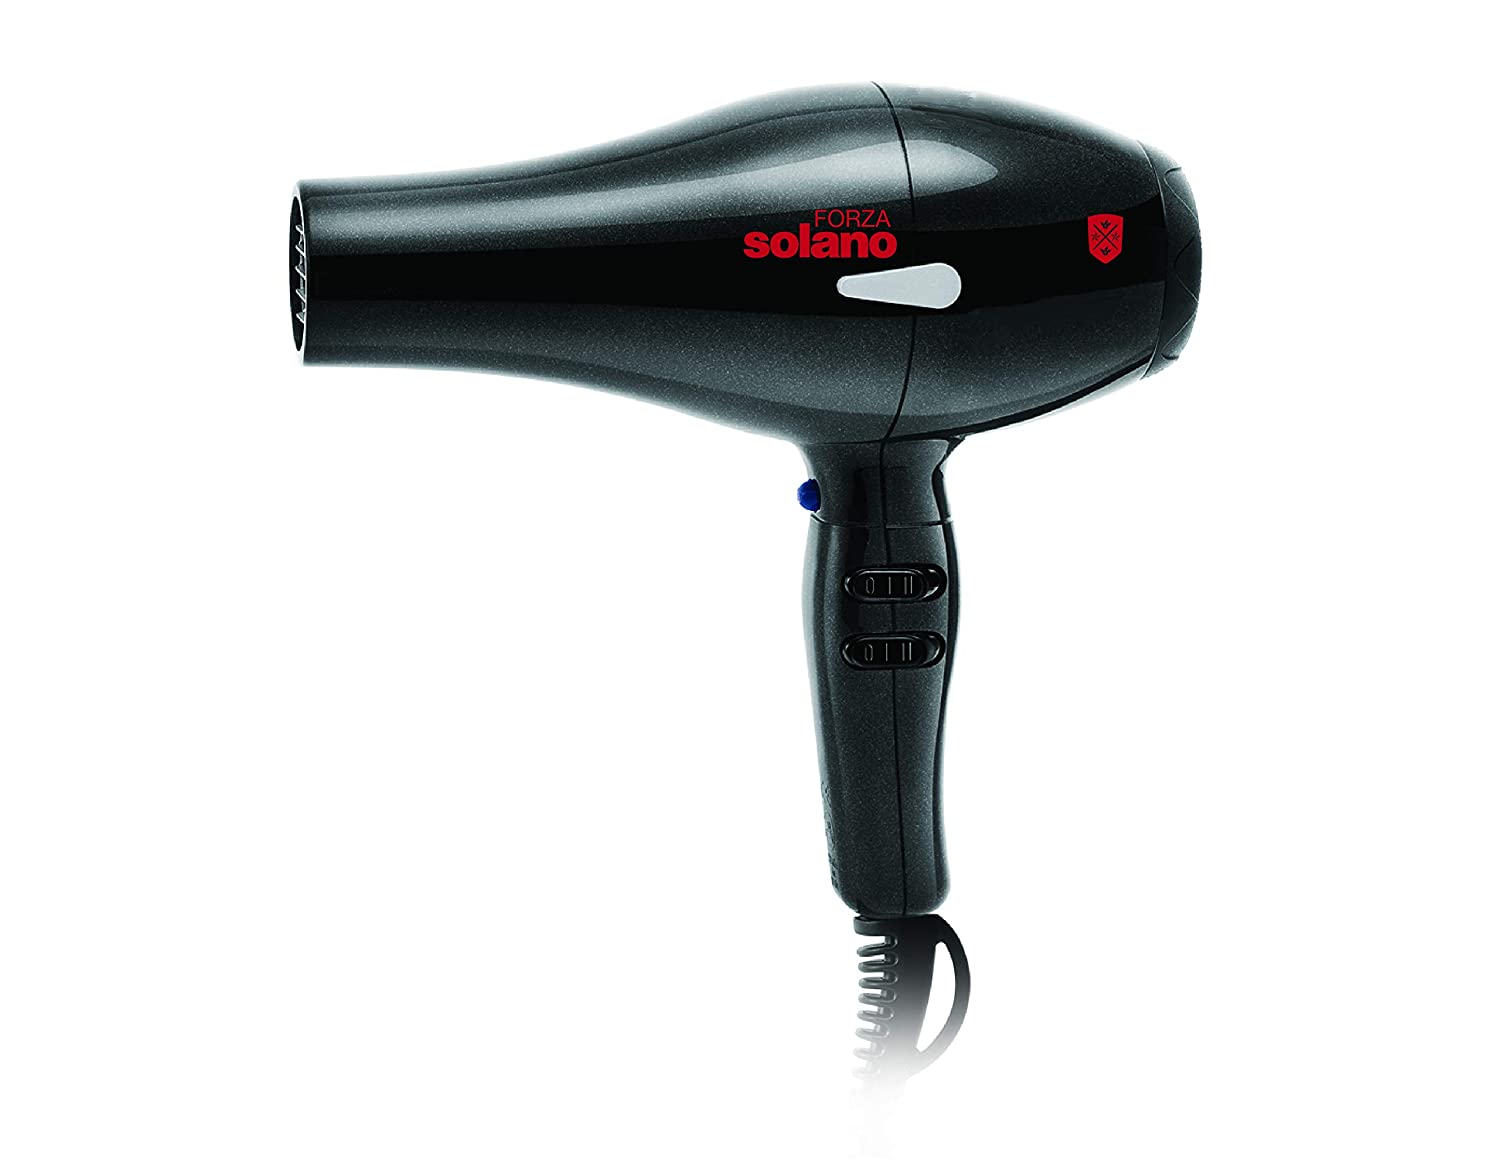 top 10 best hair dryers 2020 best blowdryers for every hair need herstylecode Top 10 Best Hair Dryers 2023 - Best Blowdryers for Every Hair Need